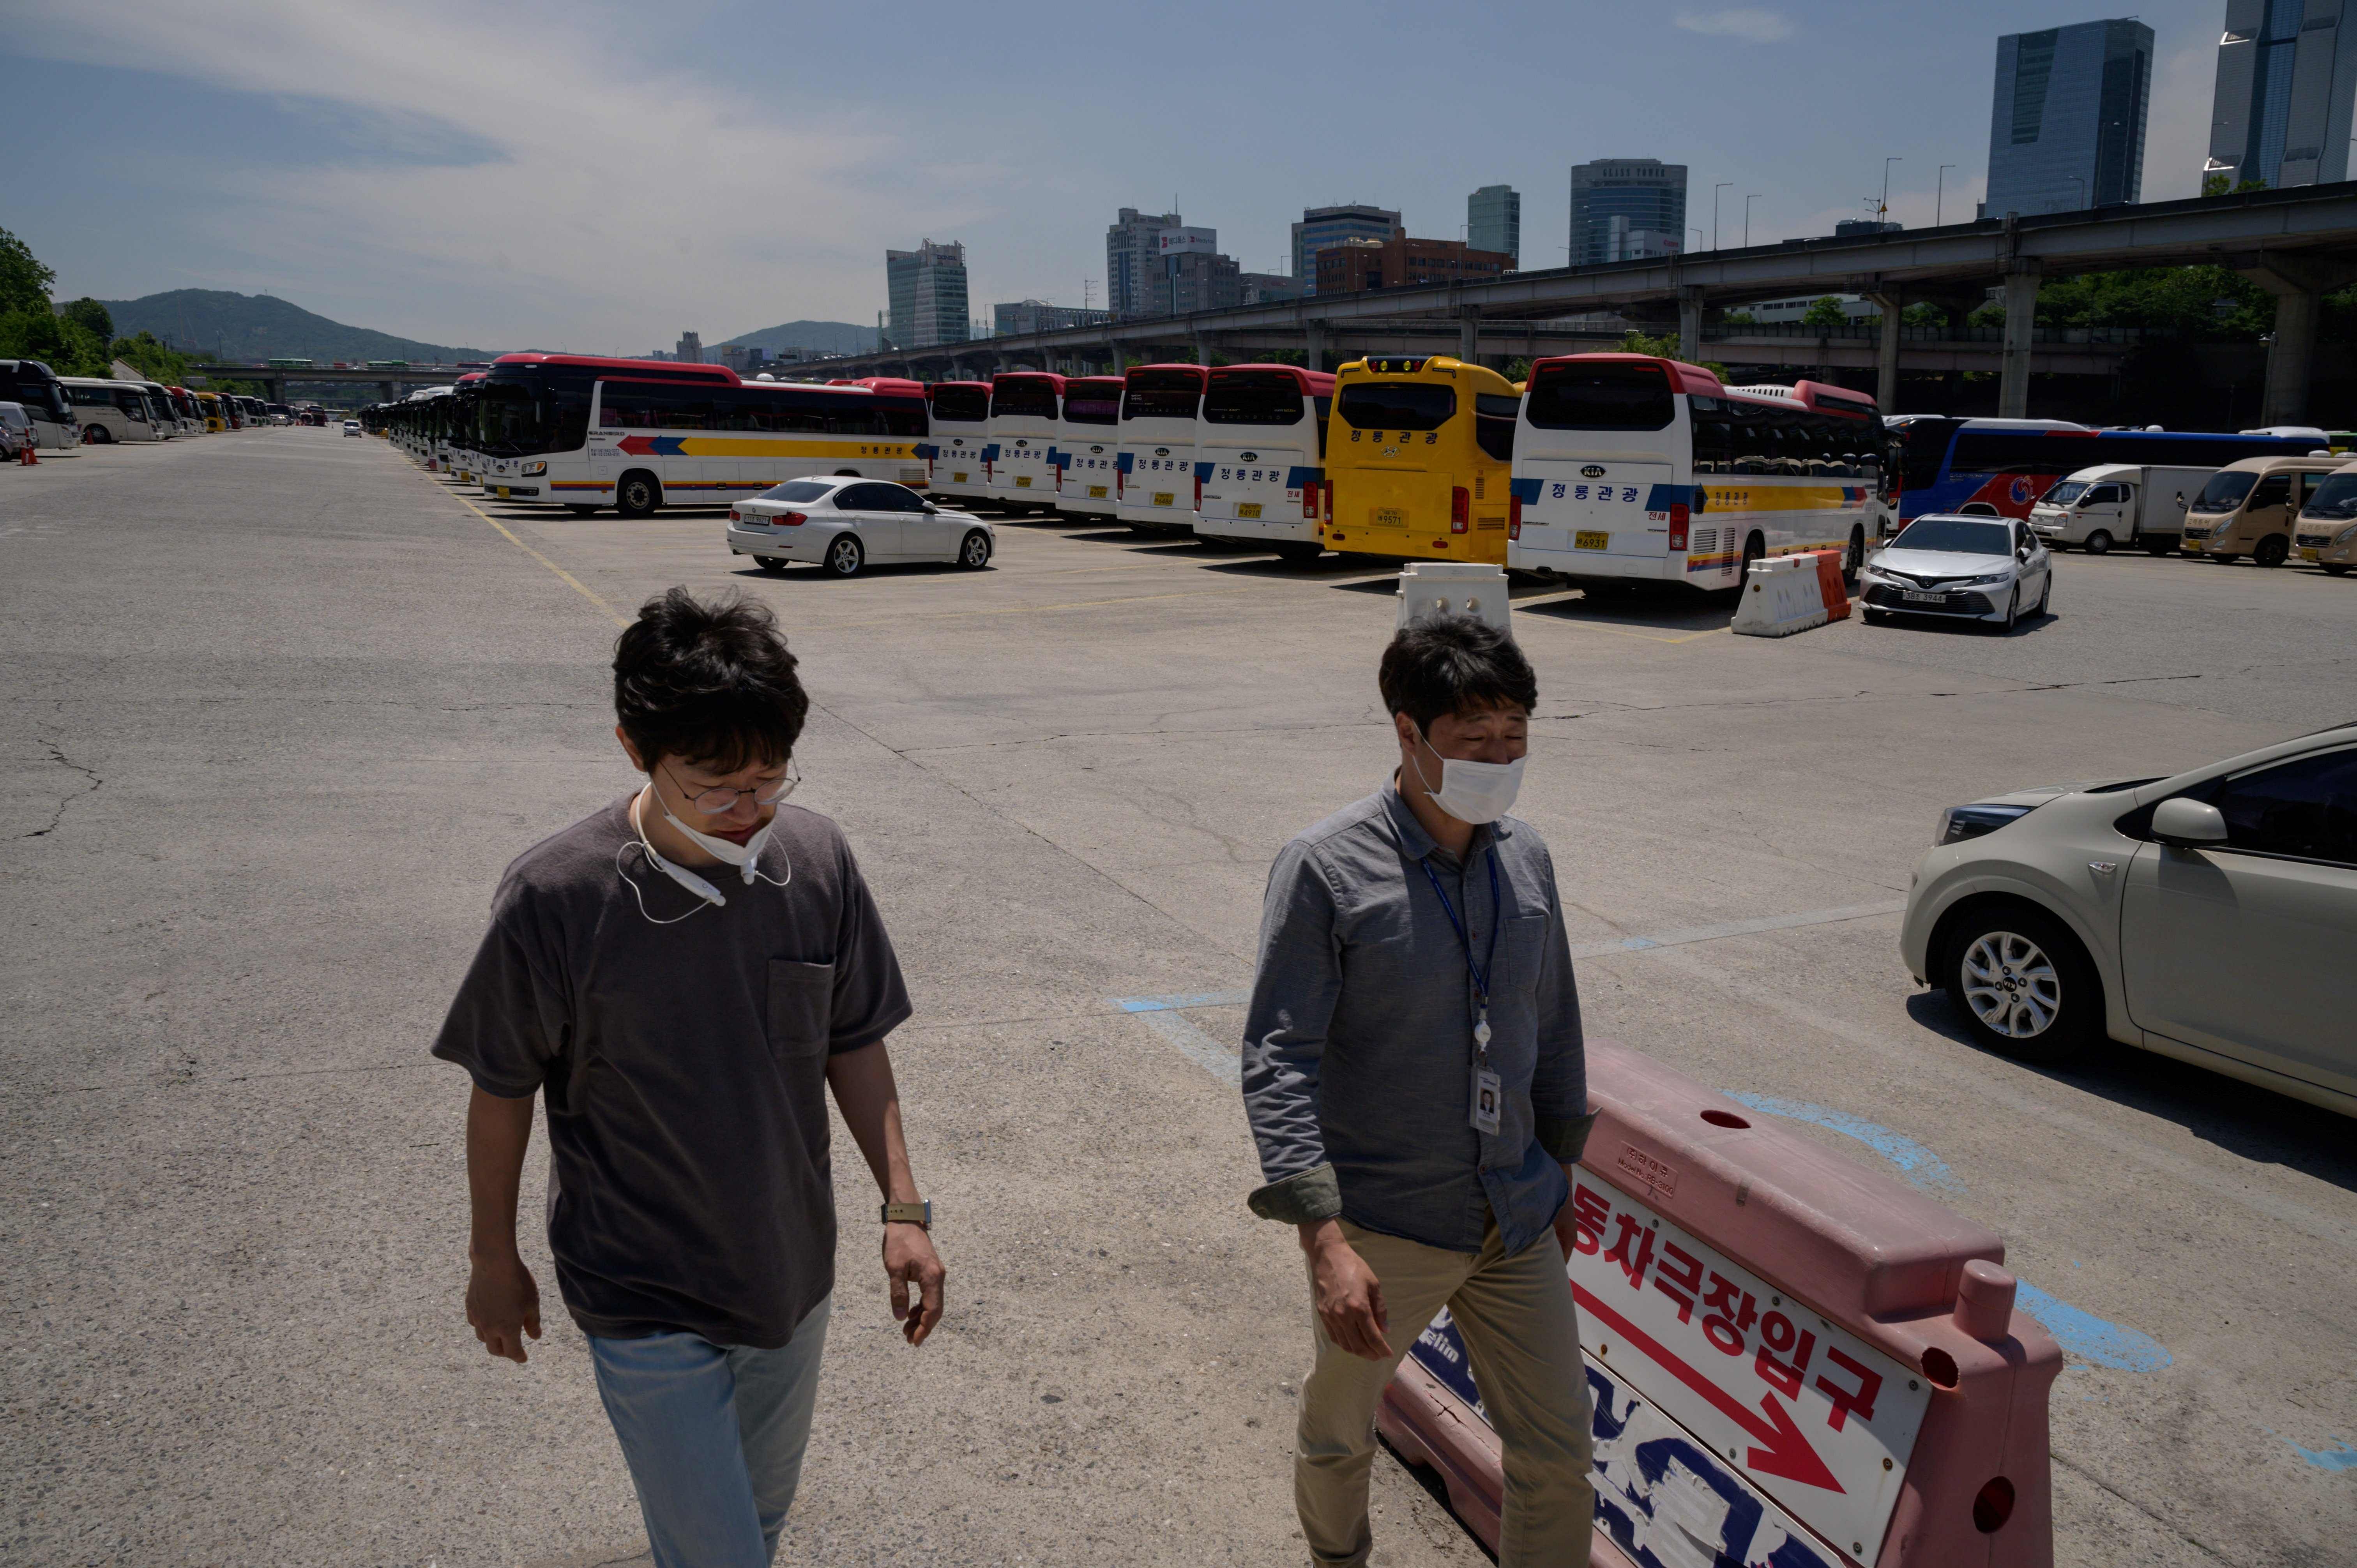 Two men wearing face masks walk before tour busses stored in a parking lot in Seoul amid a downturn in tourism due to the covid-19 novel coronavirus pandemic. (AFP Photo)